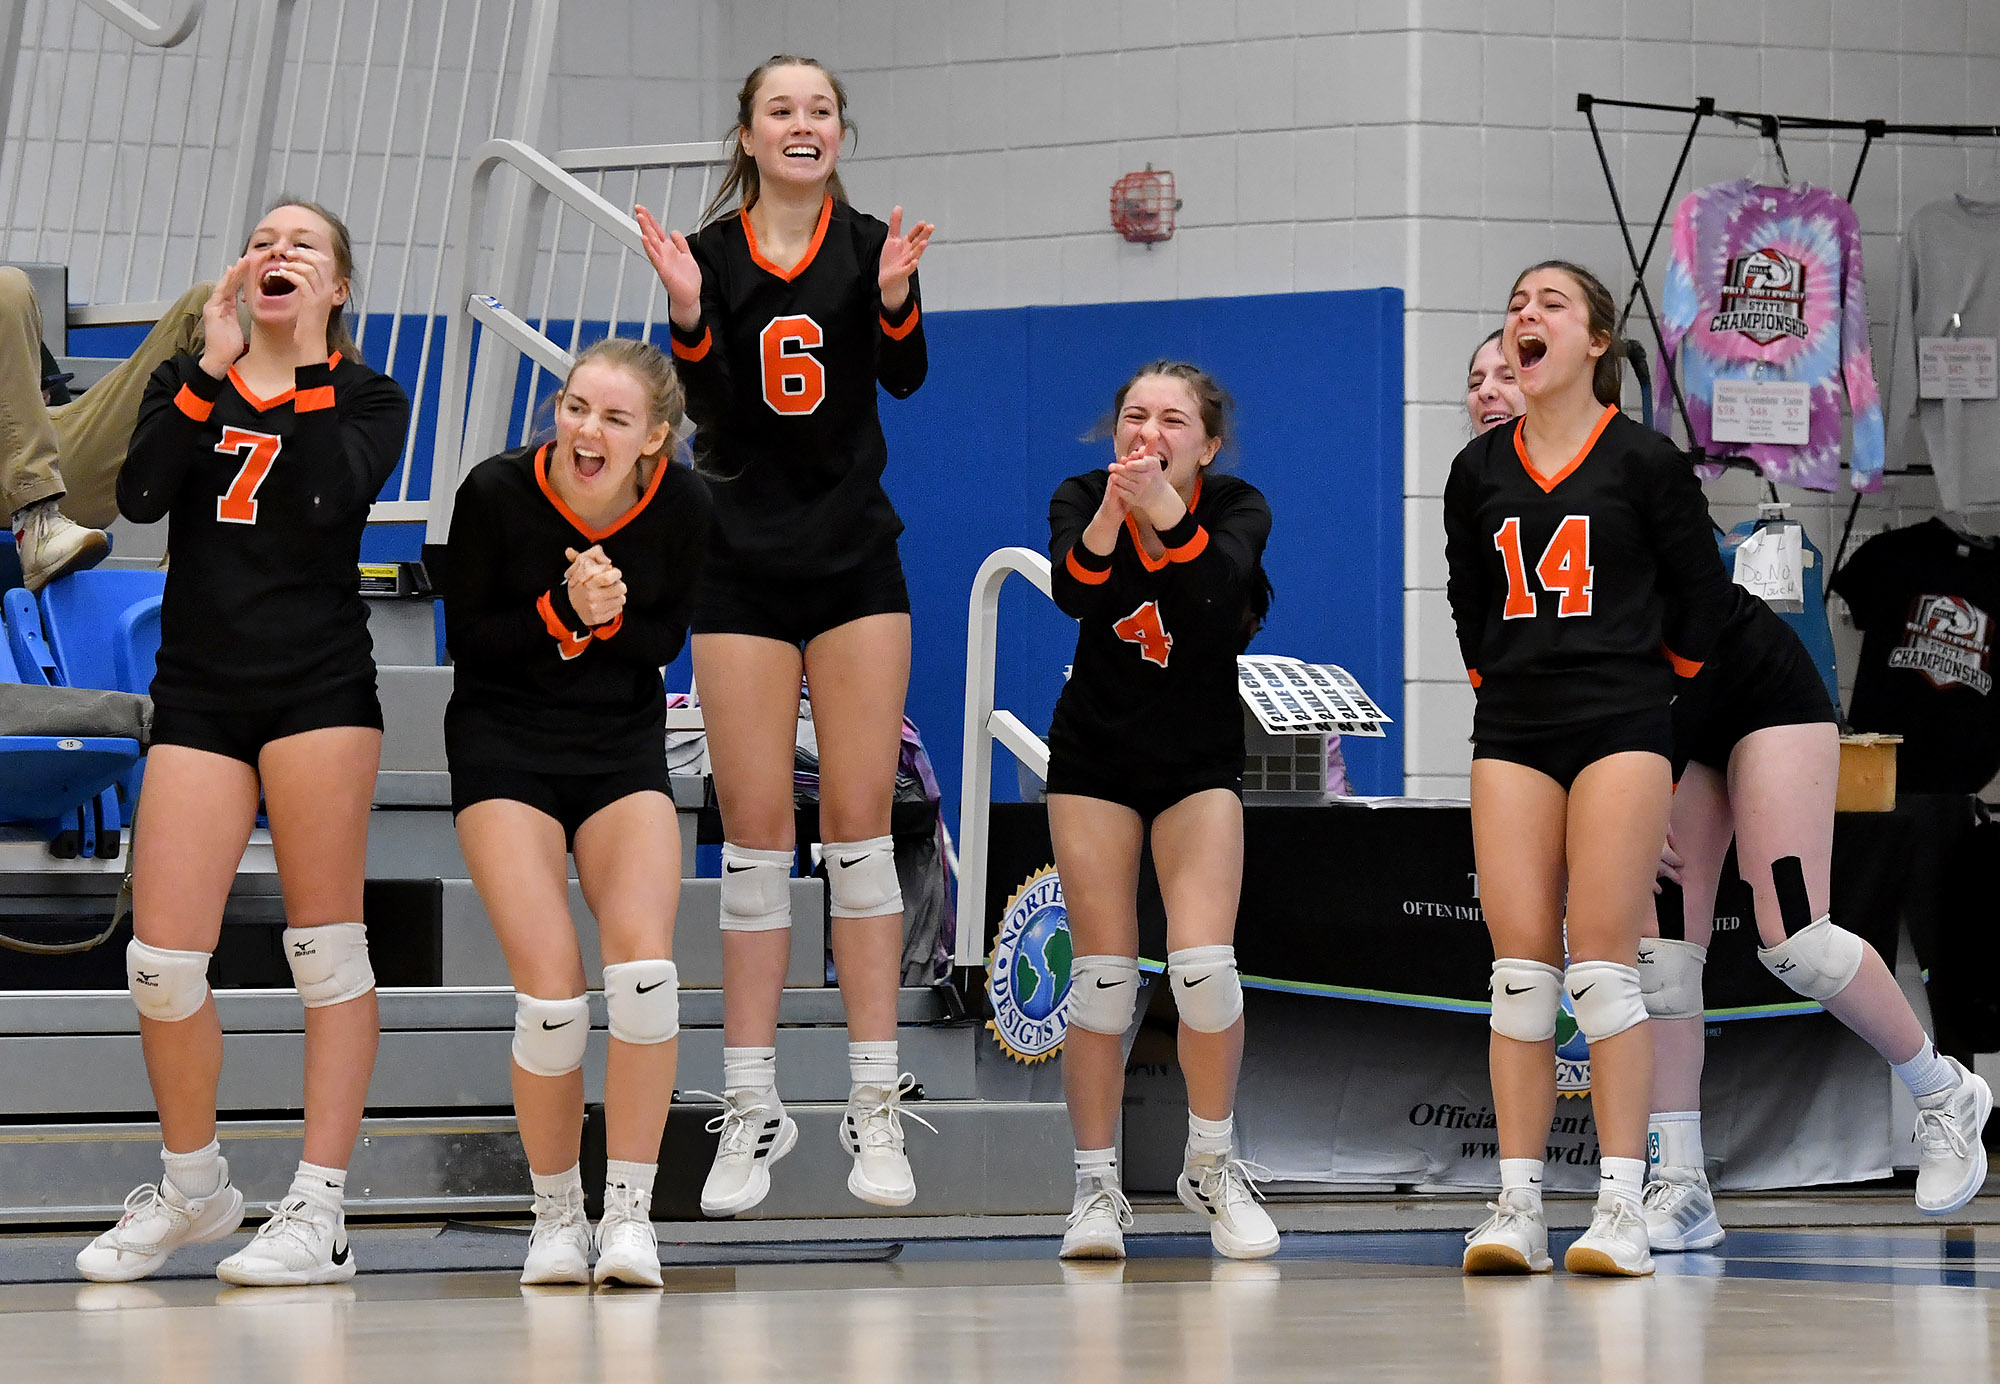 With every ounce of energy, Ipswich girls' volleyball nets three